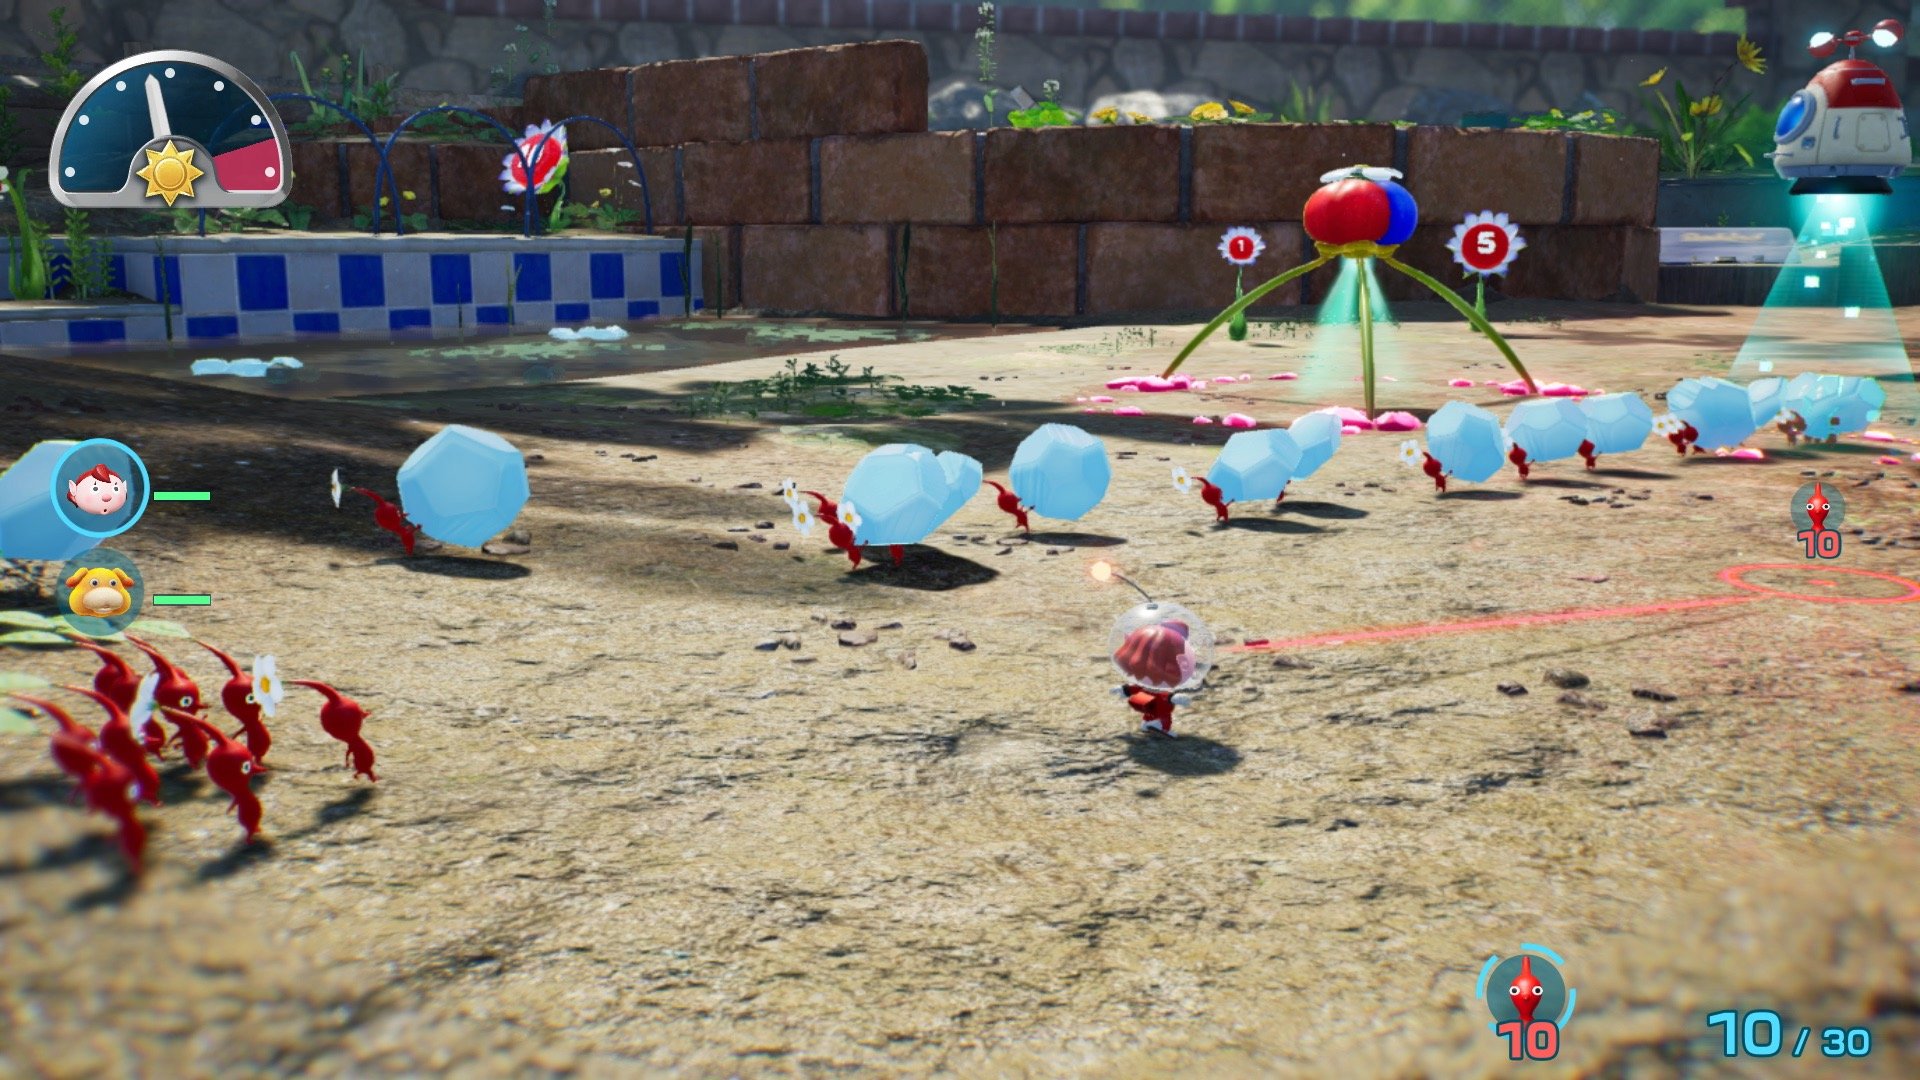 Pikmin 4 Gameplay Overview Trailer Shows Off Exploration and Dandori  Battles; Demo Available June 28